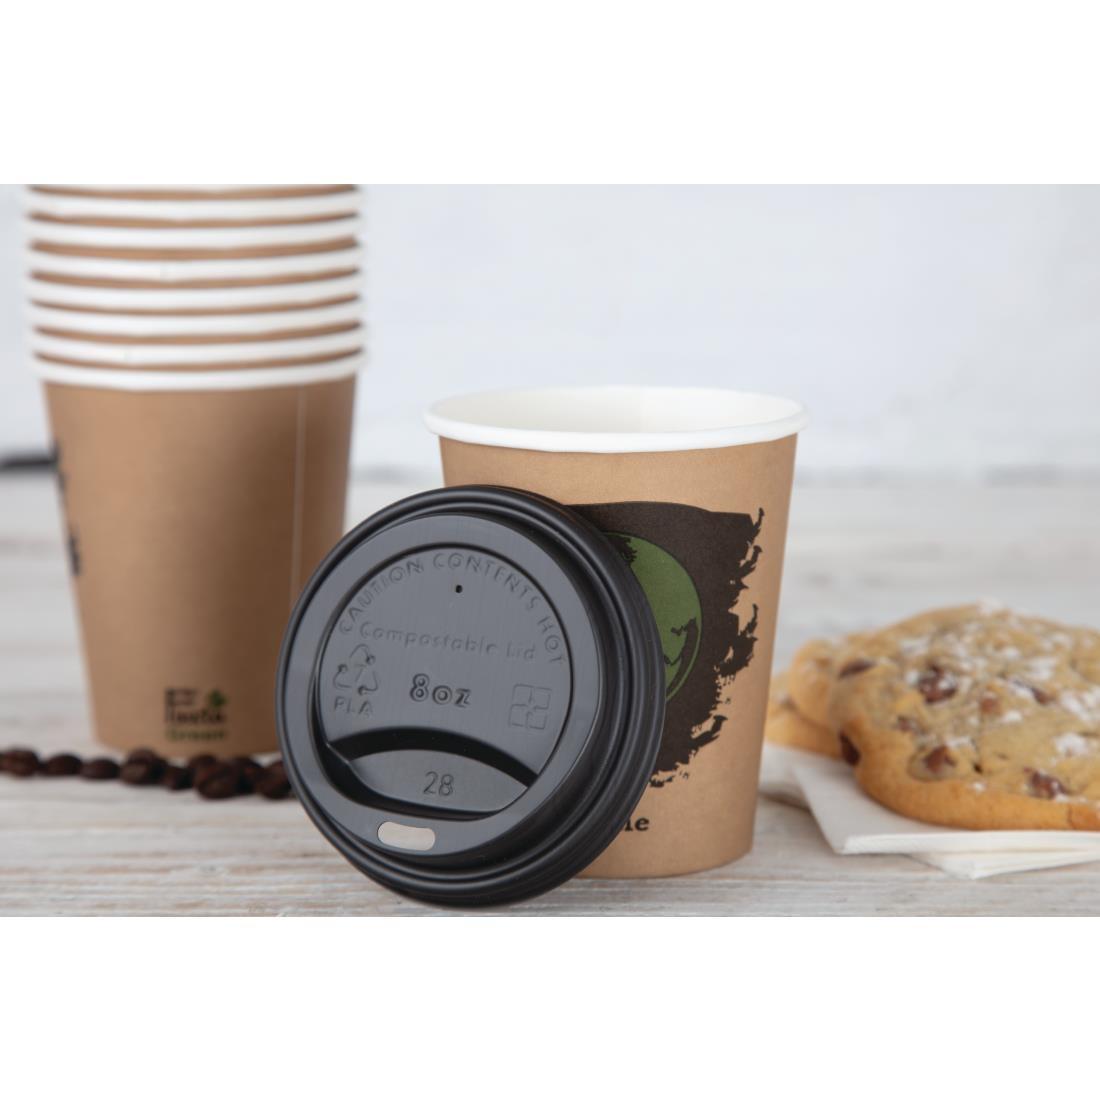 Fiesta Compostable Coffee Cups Single Wall 236ml / 8oz (Pack of 1000) - DS056  - 7